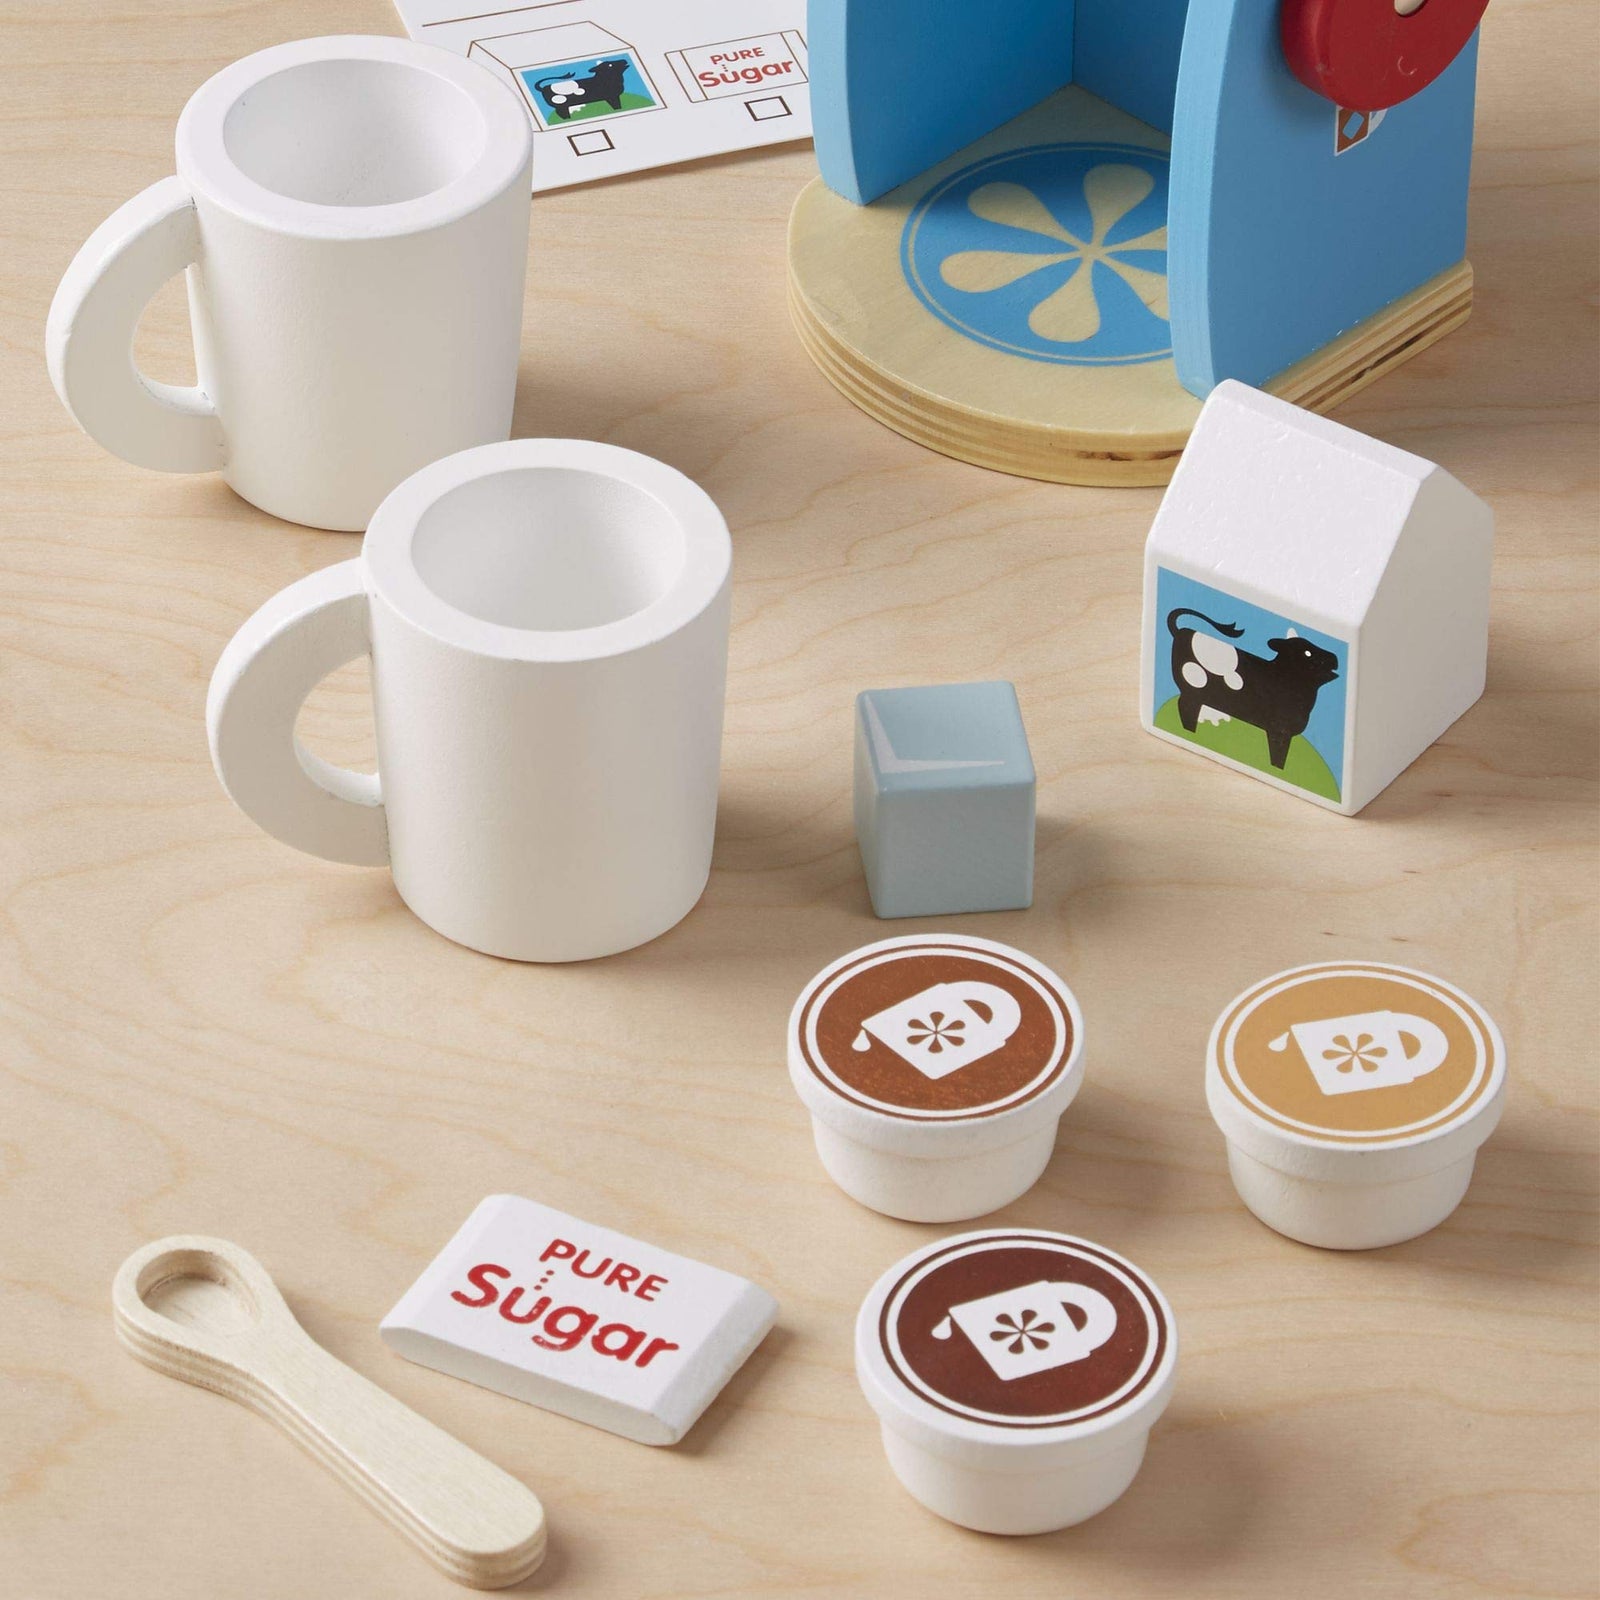 Melissa & Doug 12-Pieces Brew and Serve Wooden Coffee Maker Set - Play Kitchen Accessories